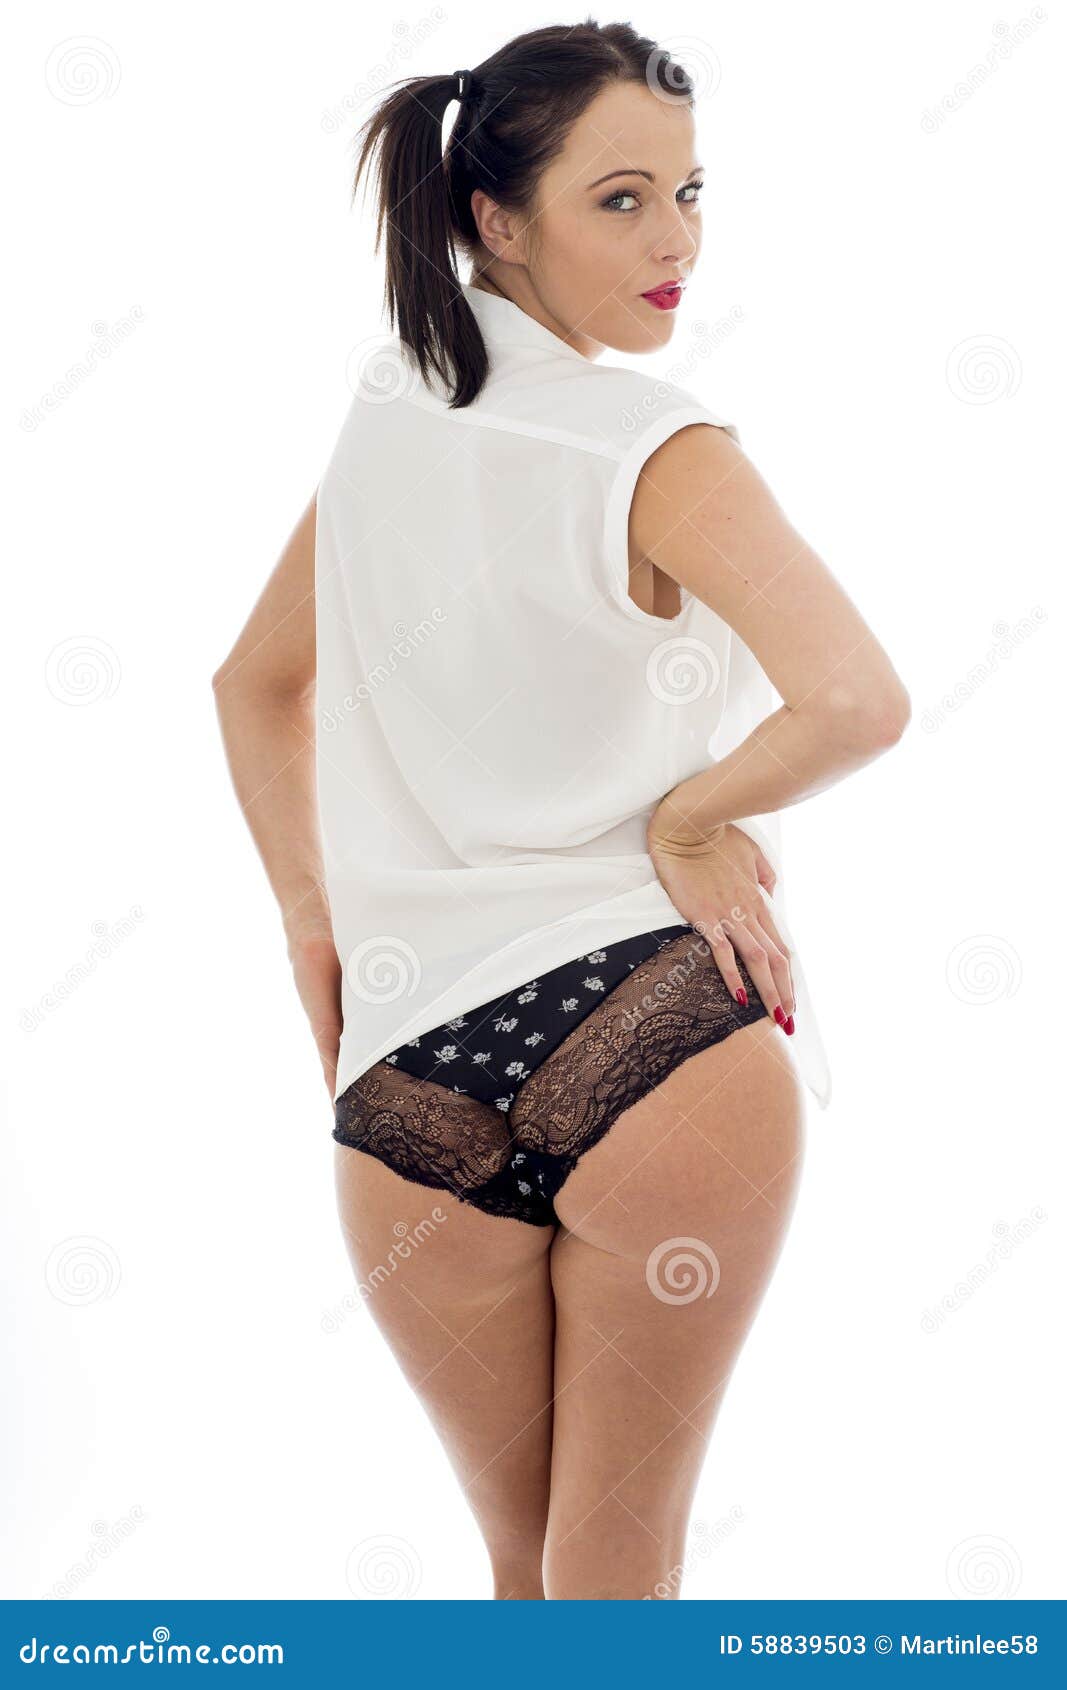 Attractive Young Model Wearing White Shirt with Lacy Black Lacy Panties  Stock Image - Image of glamor, panties: 58839503